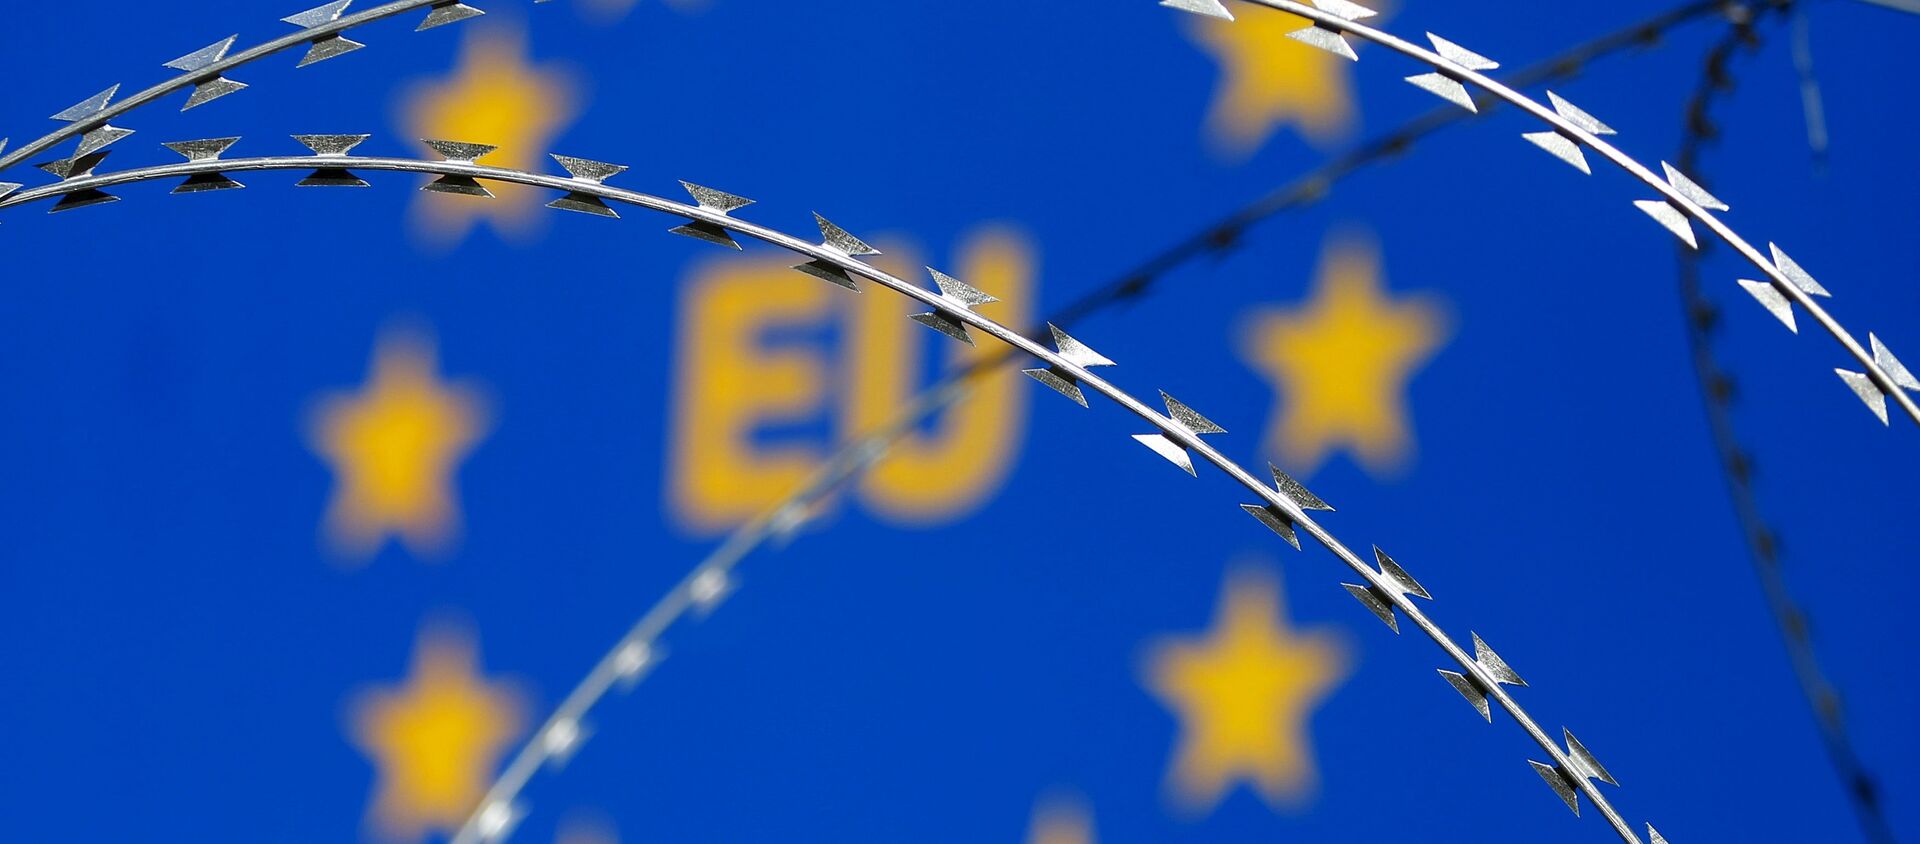 Razor wire is seen in front of an European Union (EU) sign during a protest against barbed wire fences along the border crossing between Slovenia and Croatia in Brezovica pri Gradinu, Slovenia, in this file picture taken December 19, 2015. - Sputnik International, 1920, 23.02.2021